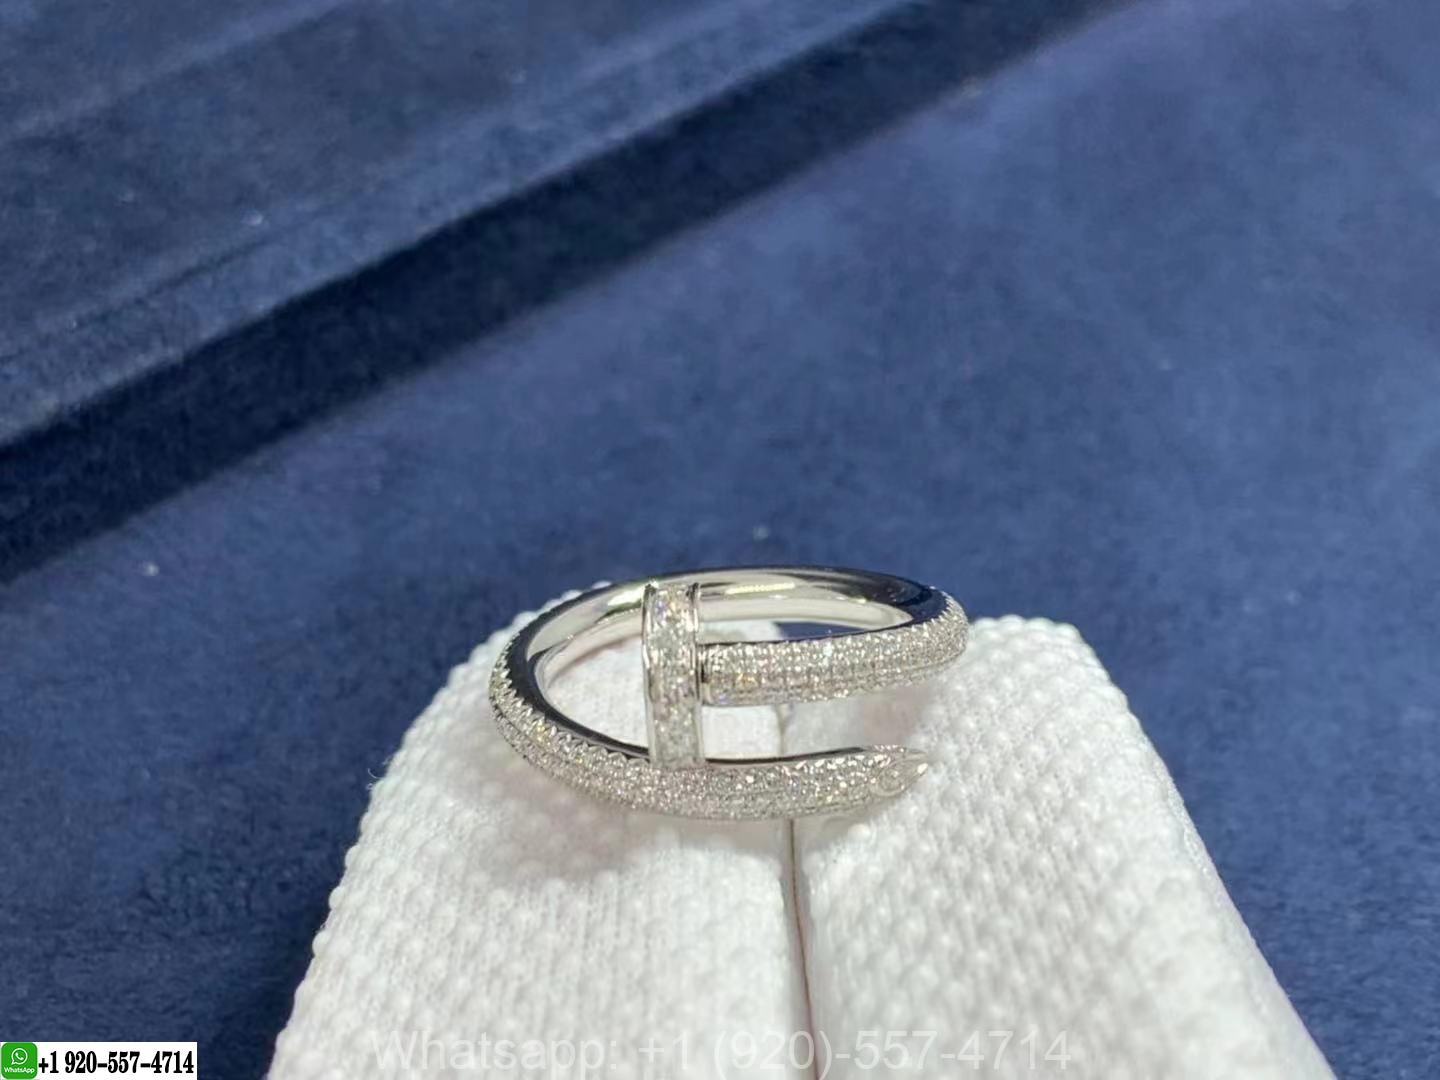 Cartier Juste un Clou Ring in 18k White Gold with Diamonds N4748700